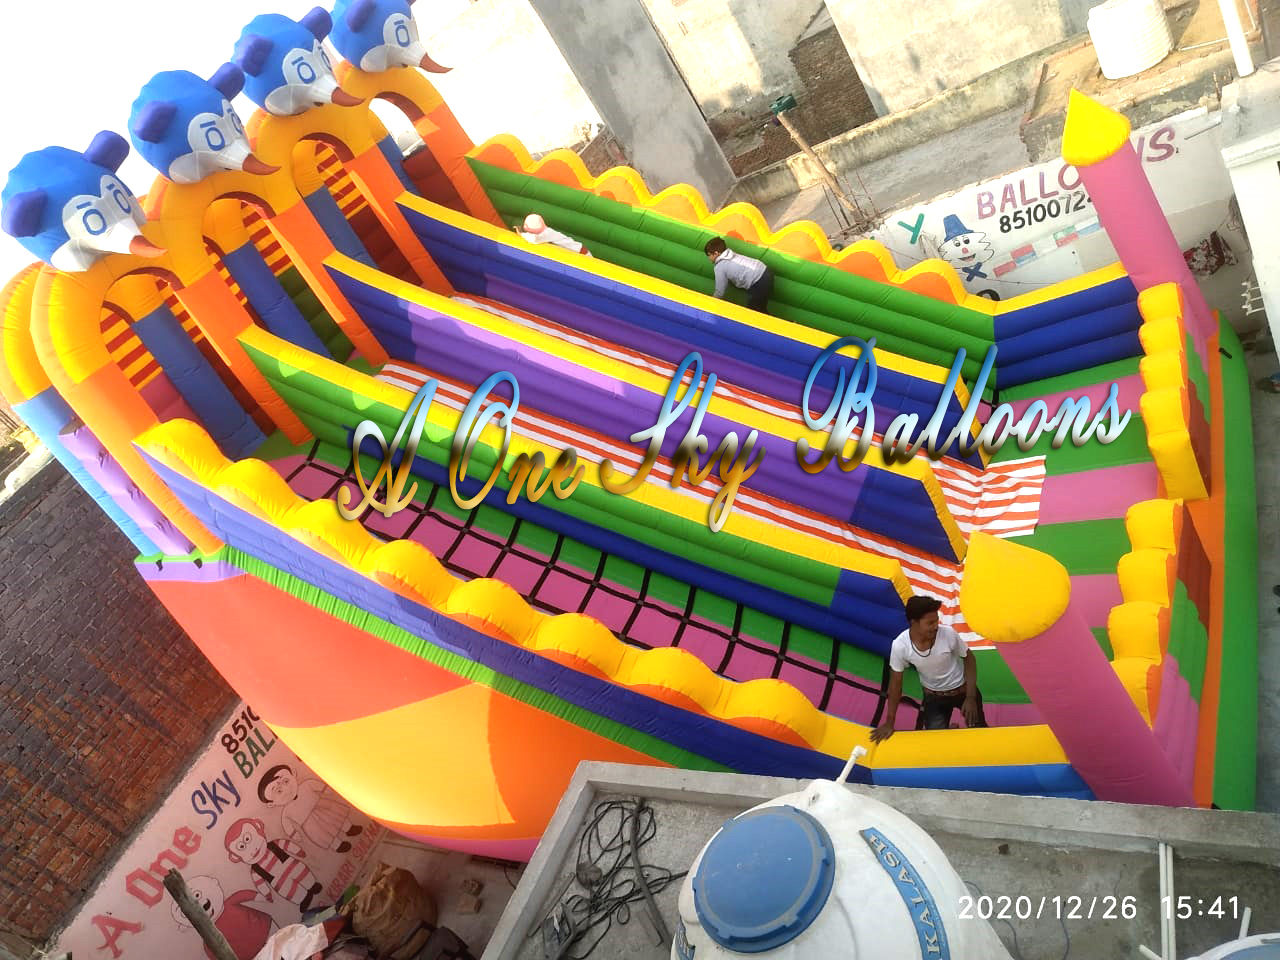 Bouncy castle Manufacturers in india